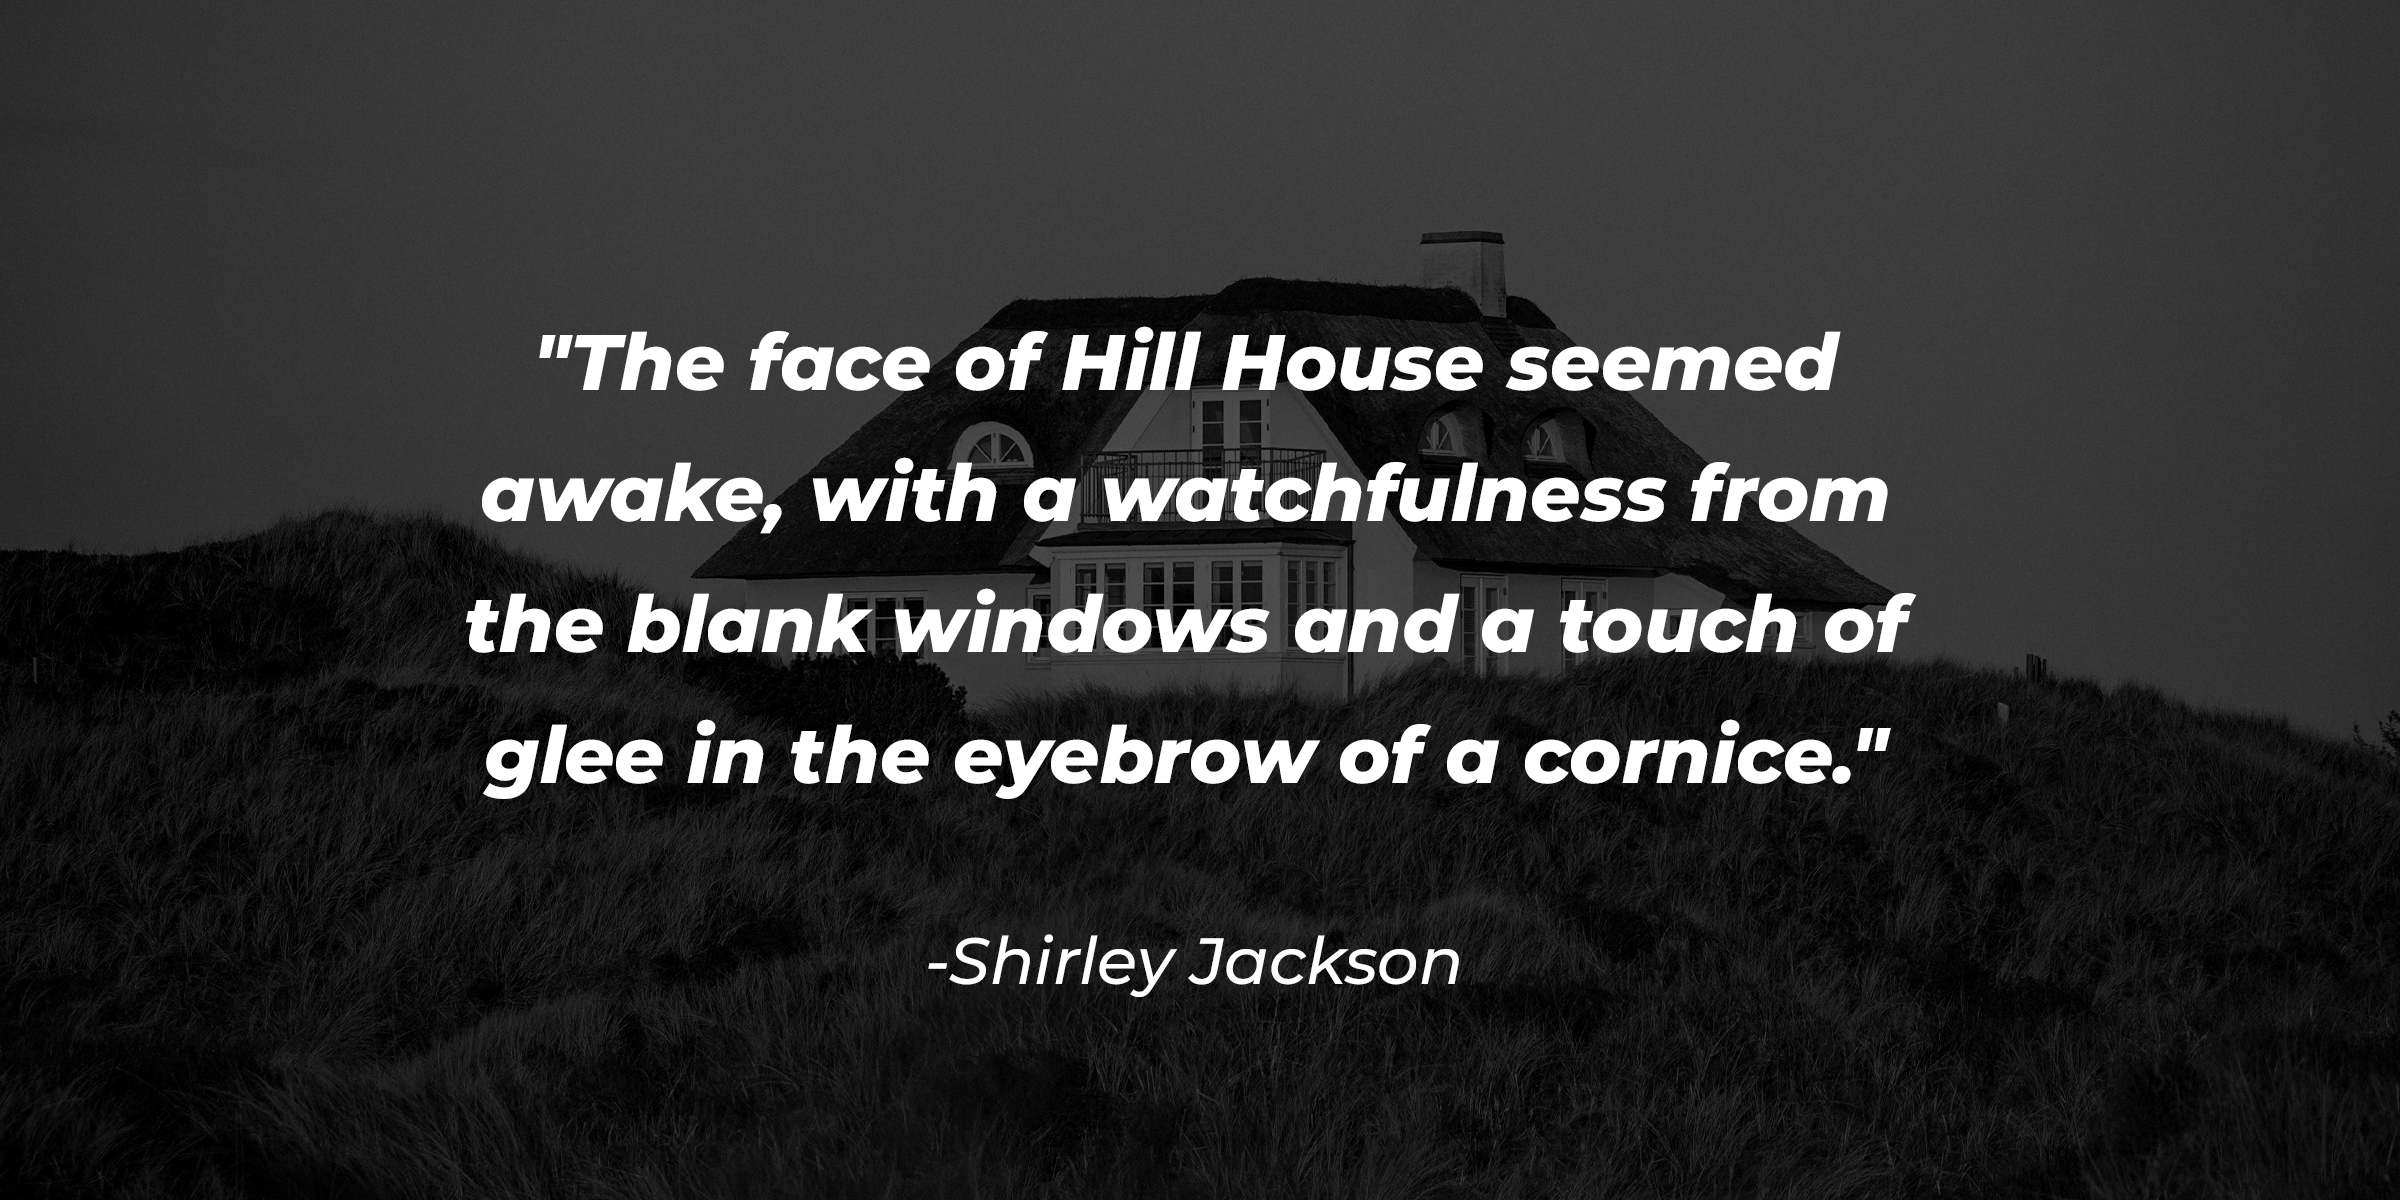 Shirley Jackson's quote against a black-and-white backdrop of a house: "The face of Hill House seemed awake, with a watchfulness from the blank windows and a touch of glee in the eyebrow of a cornice." | Source: Unsplash